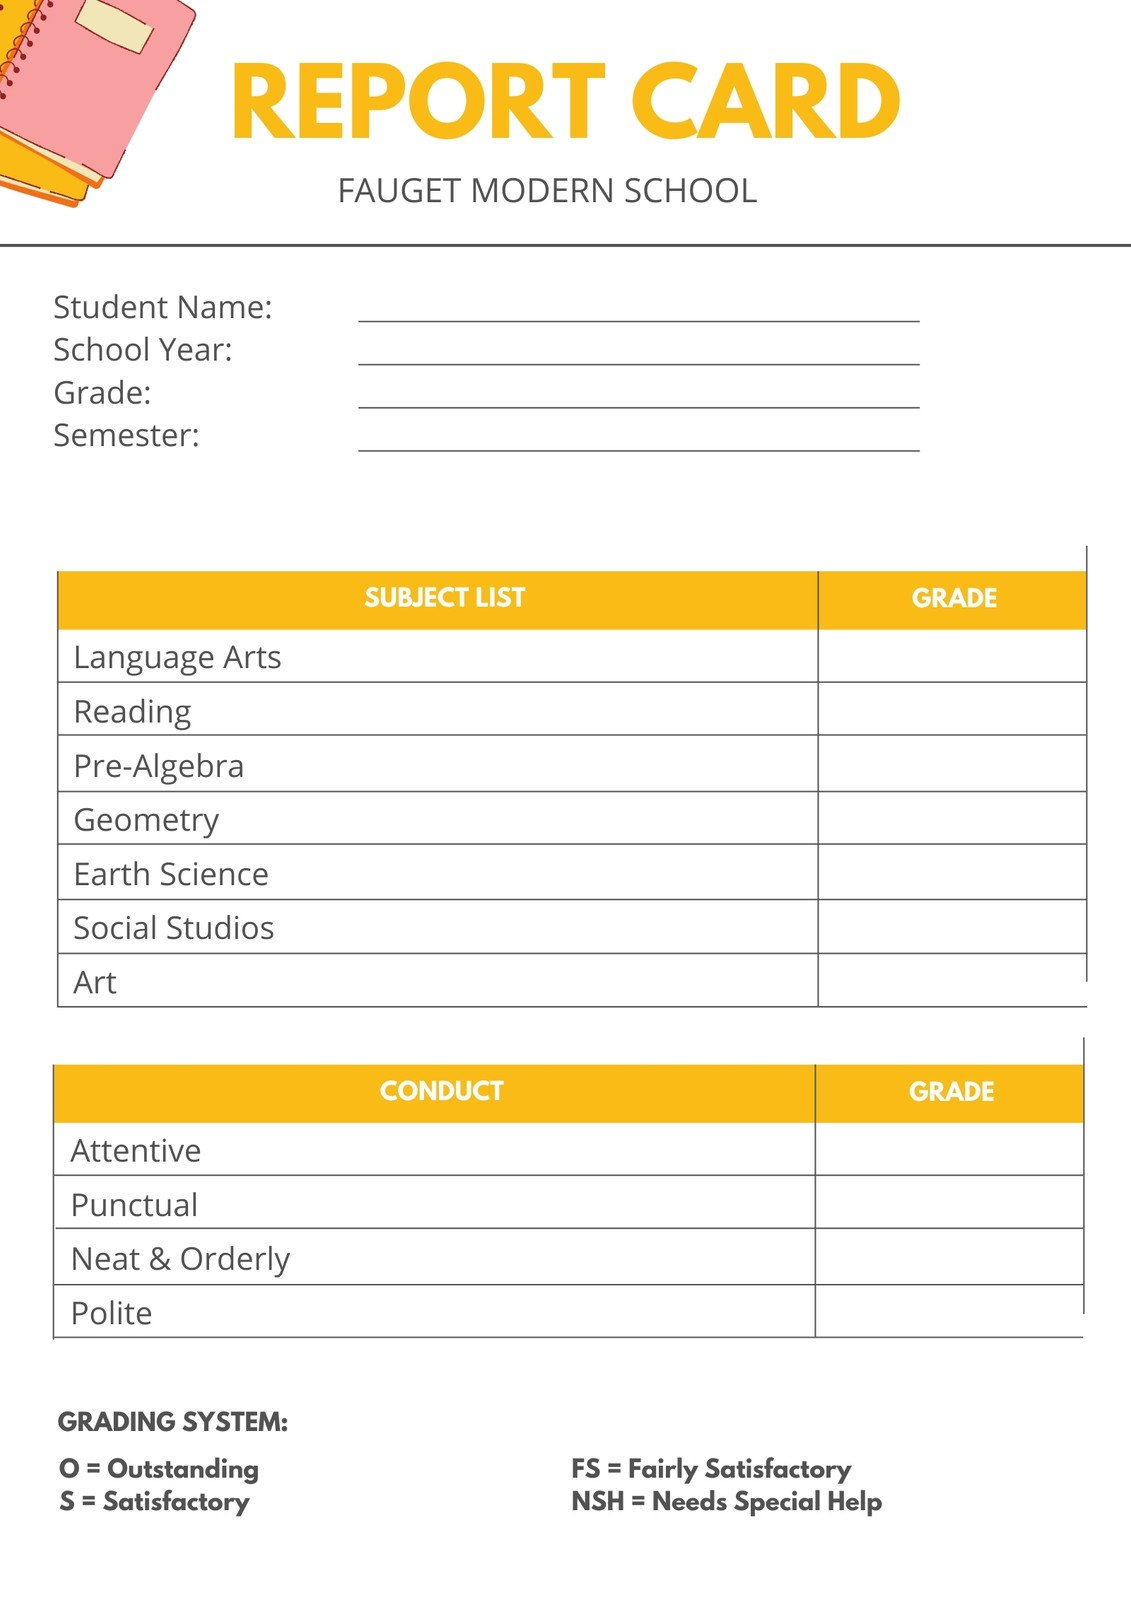 Free, printable, customizable report card templates  Canva Throughout Student Grade Report Template